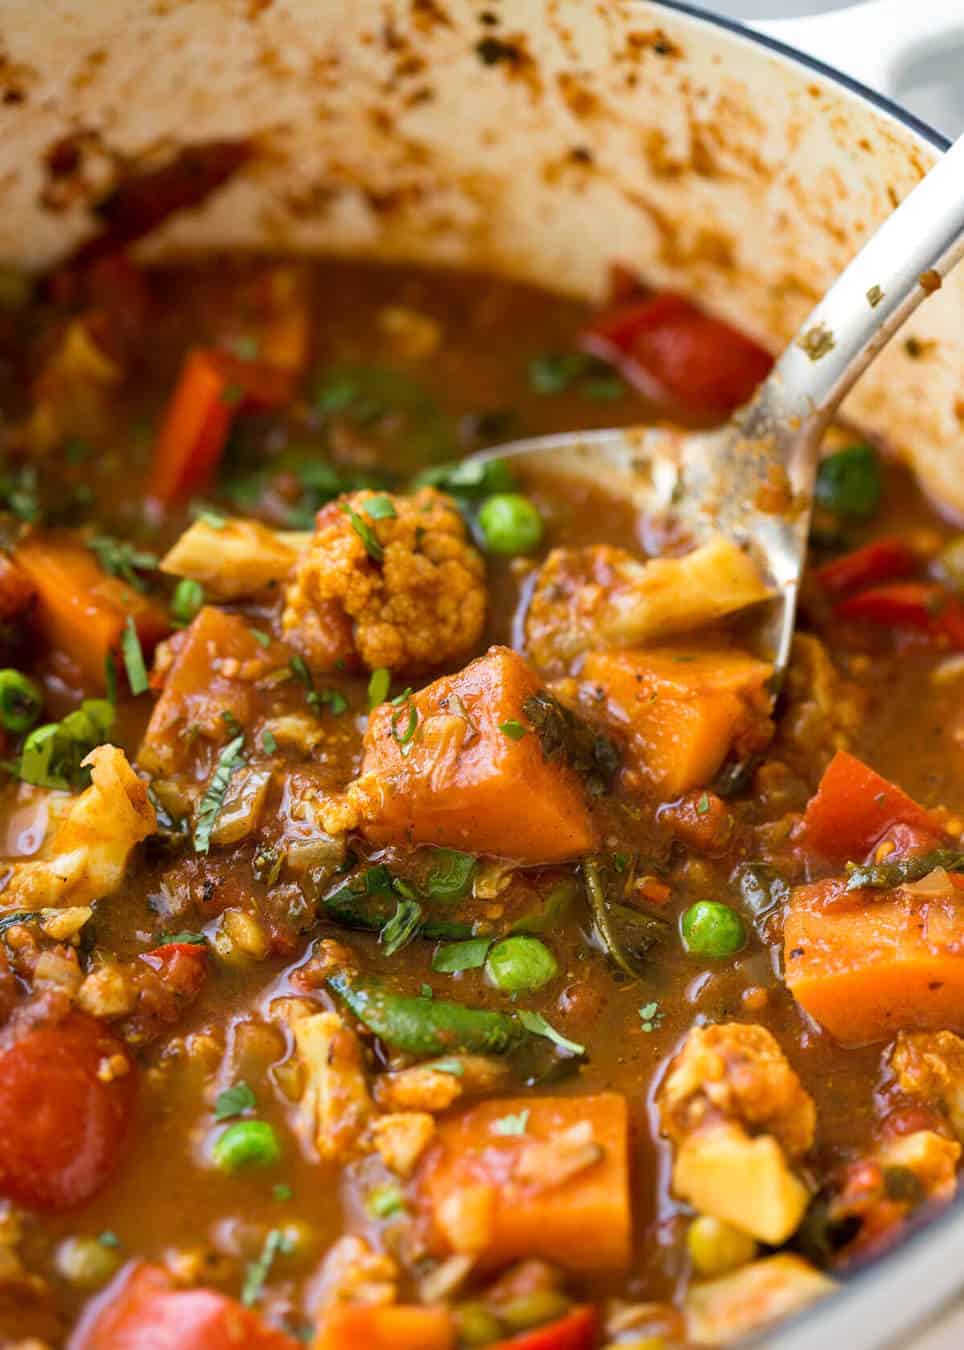 Mixed Vegetable Curry that packs a flavour punch, made with common everyday spices. Make this mild or spicy! recipetineats.com